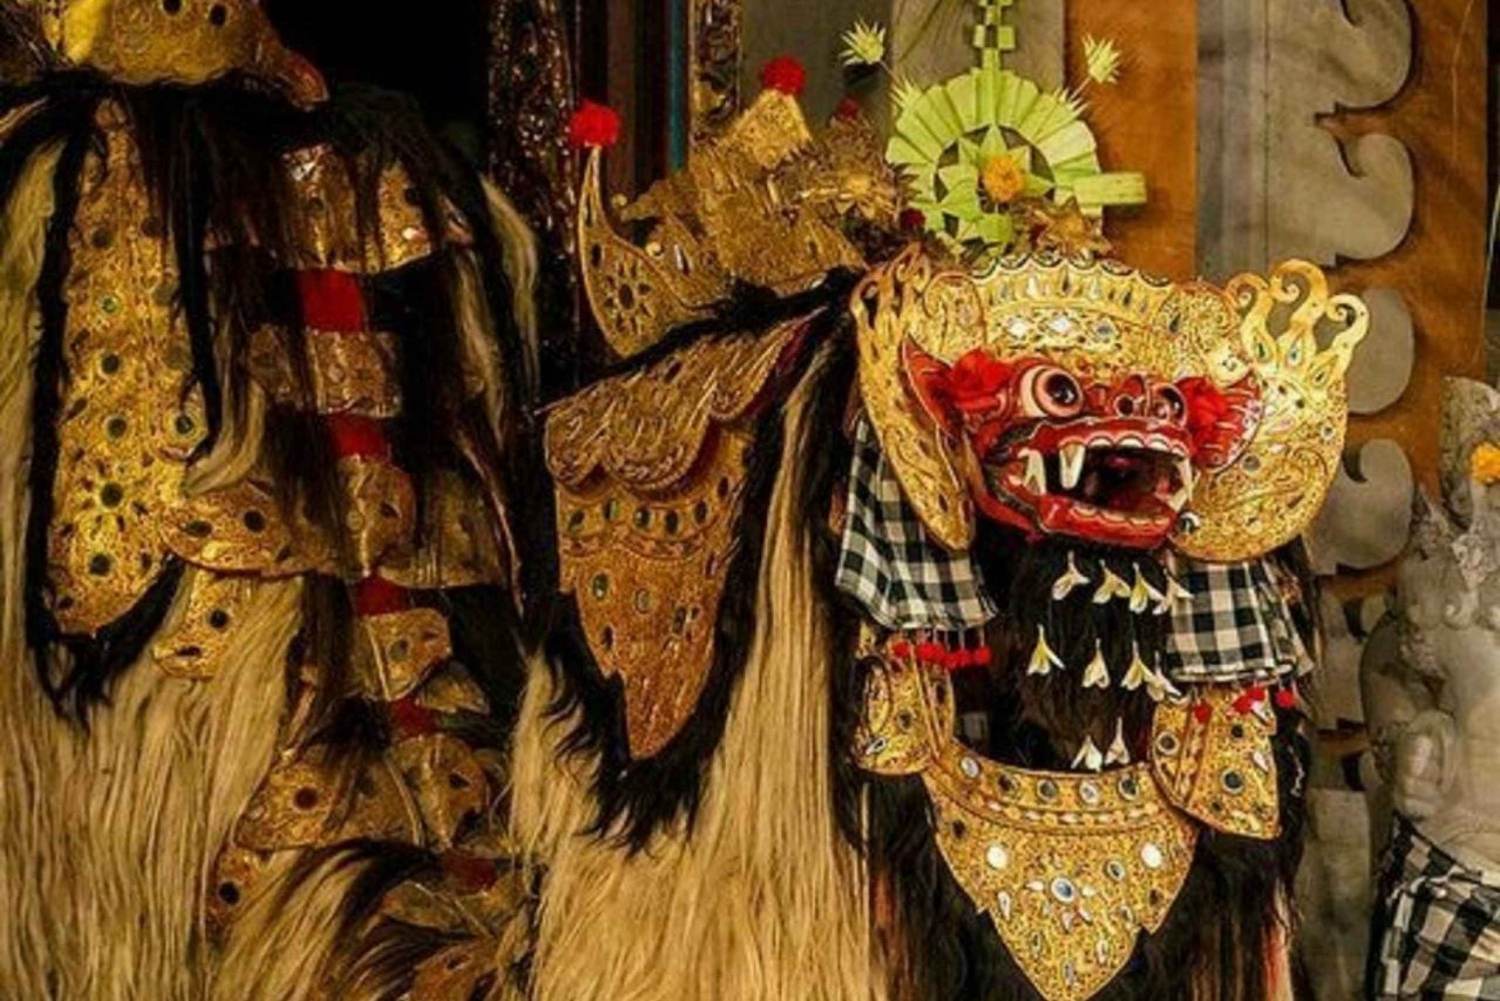 balinese culture and art - all inclusive